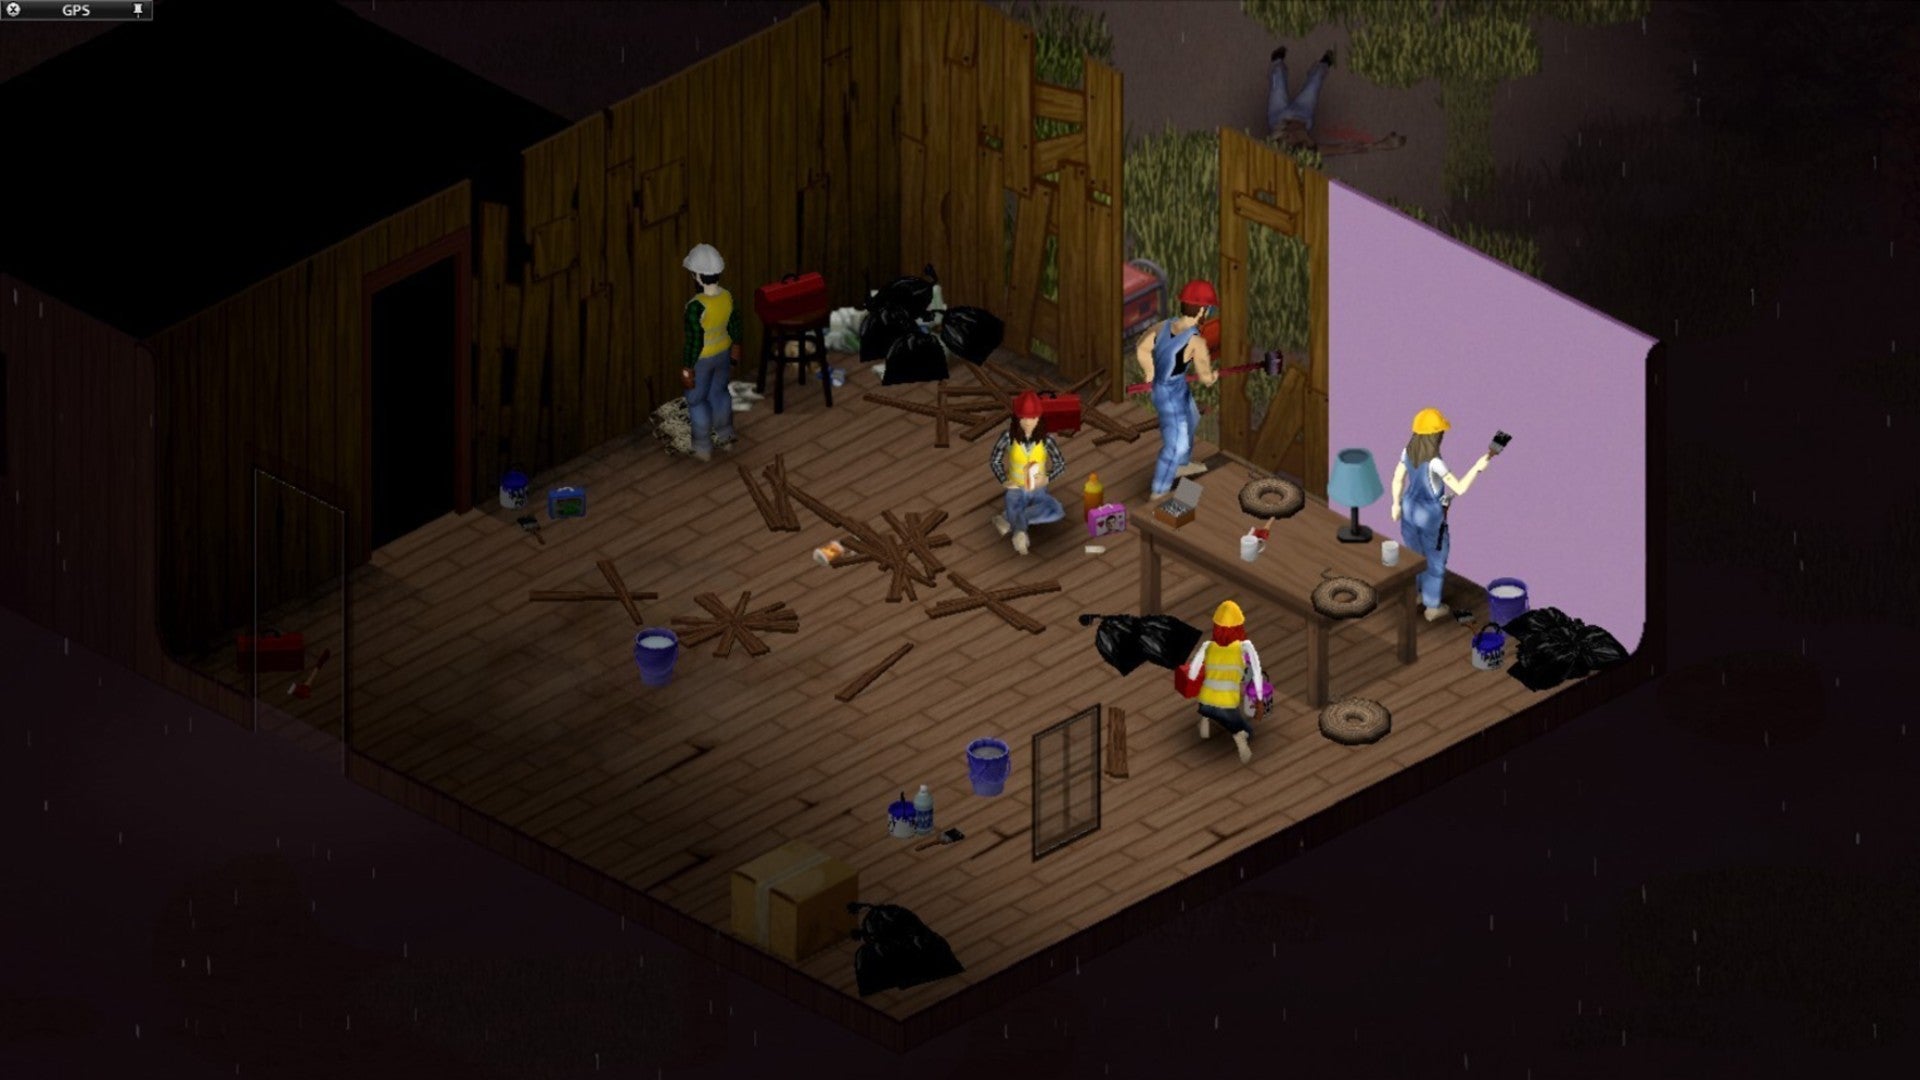 Project Zomboid players work together to build the base and paint the walls.  They were all wearing construction clothes